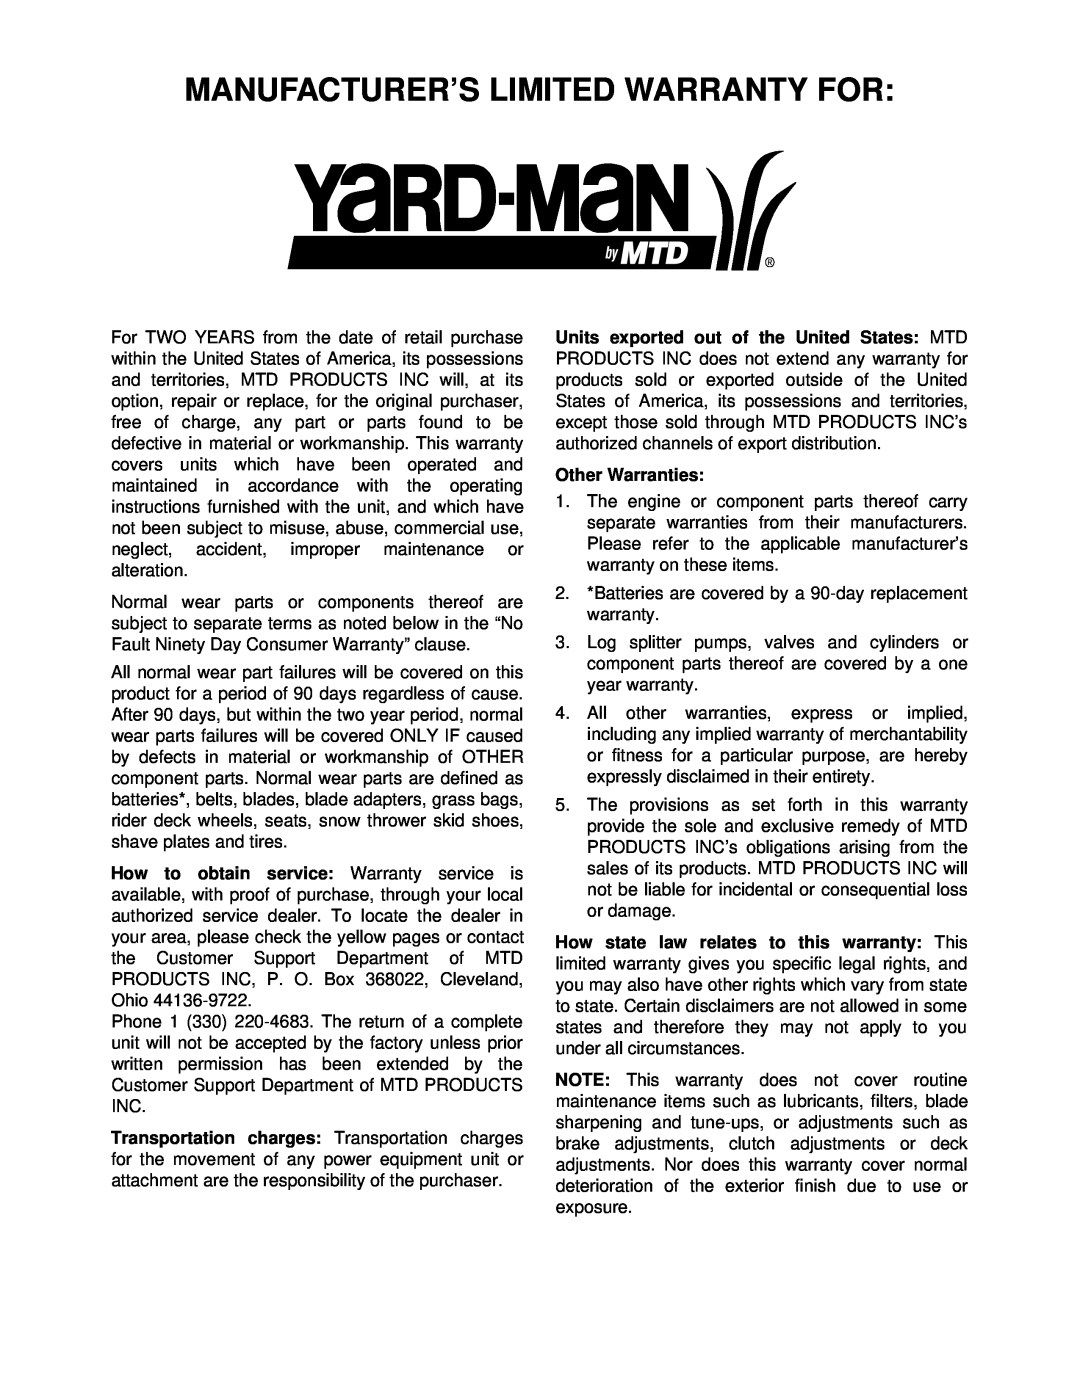 Yard-Man 247.27432 manual Manufacturer’S Limited Warranty For, Other Warranties 